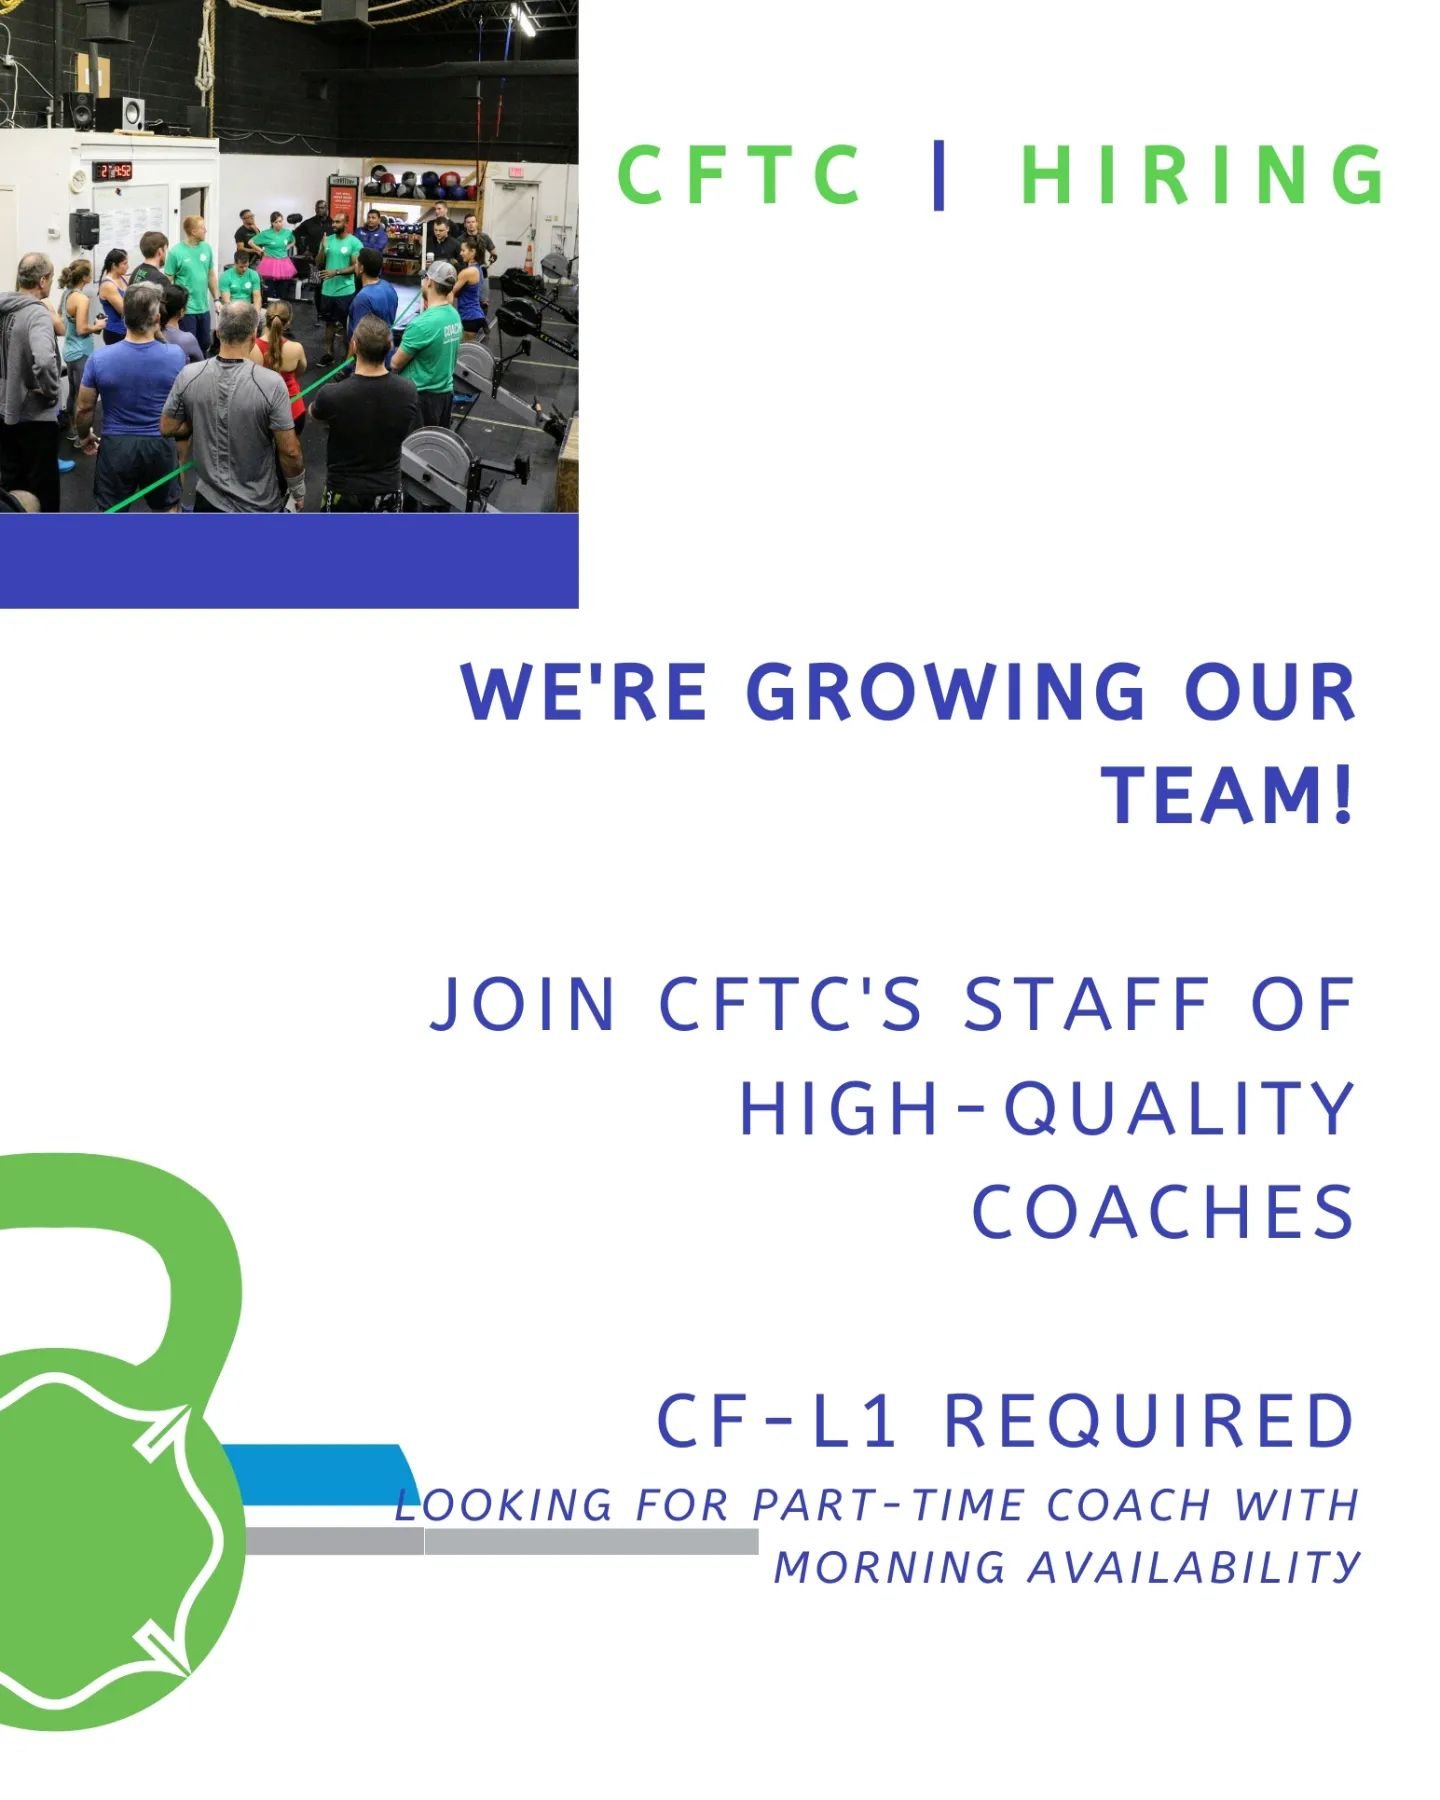 Want to be a part of our time or know someone with their L1? We'd love to chat! Looking for coaches, mornings especially. 💙💚
.
Located in Tysons VA
.
#crossfittraining #barbelljobs #crossfitaffiliatesnortheast